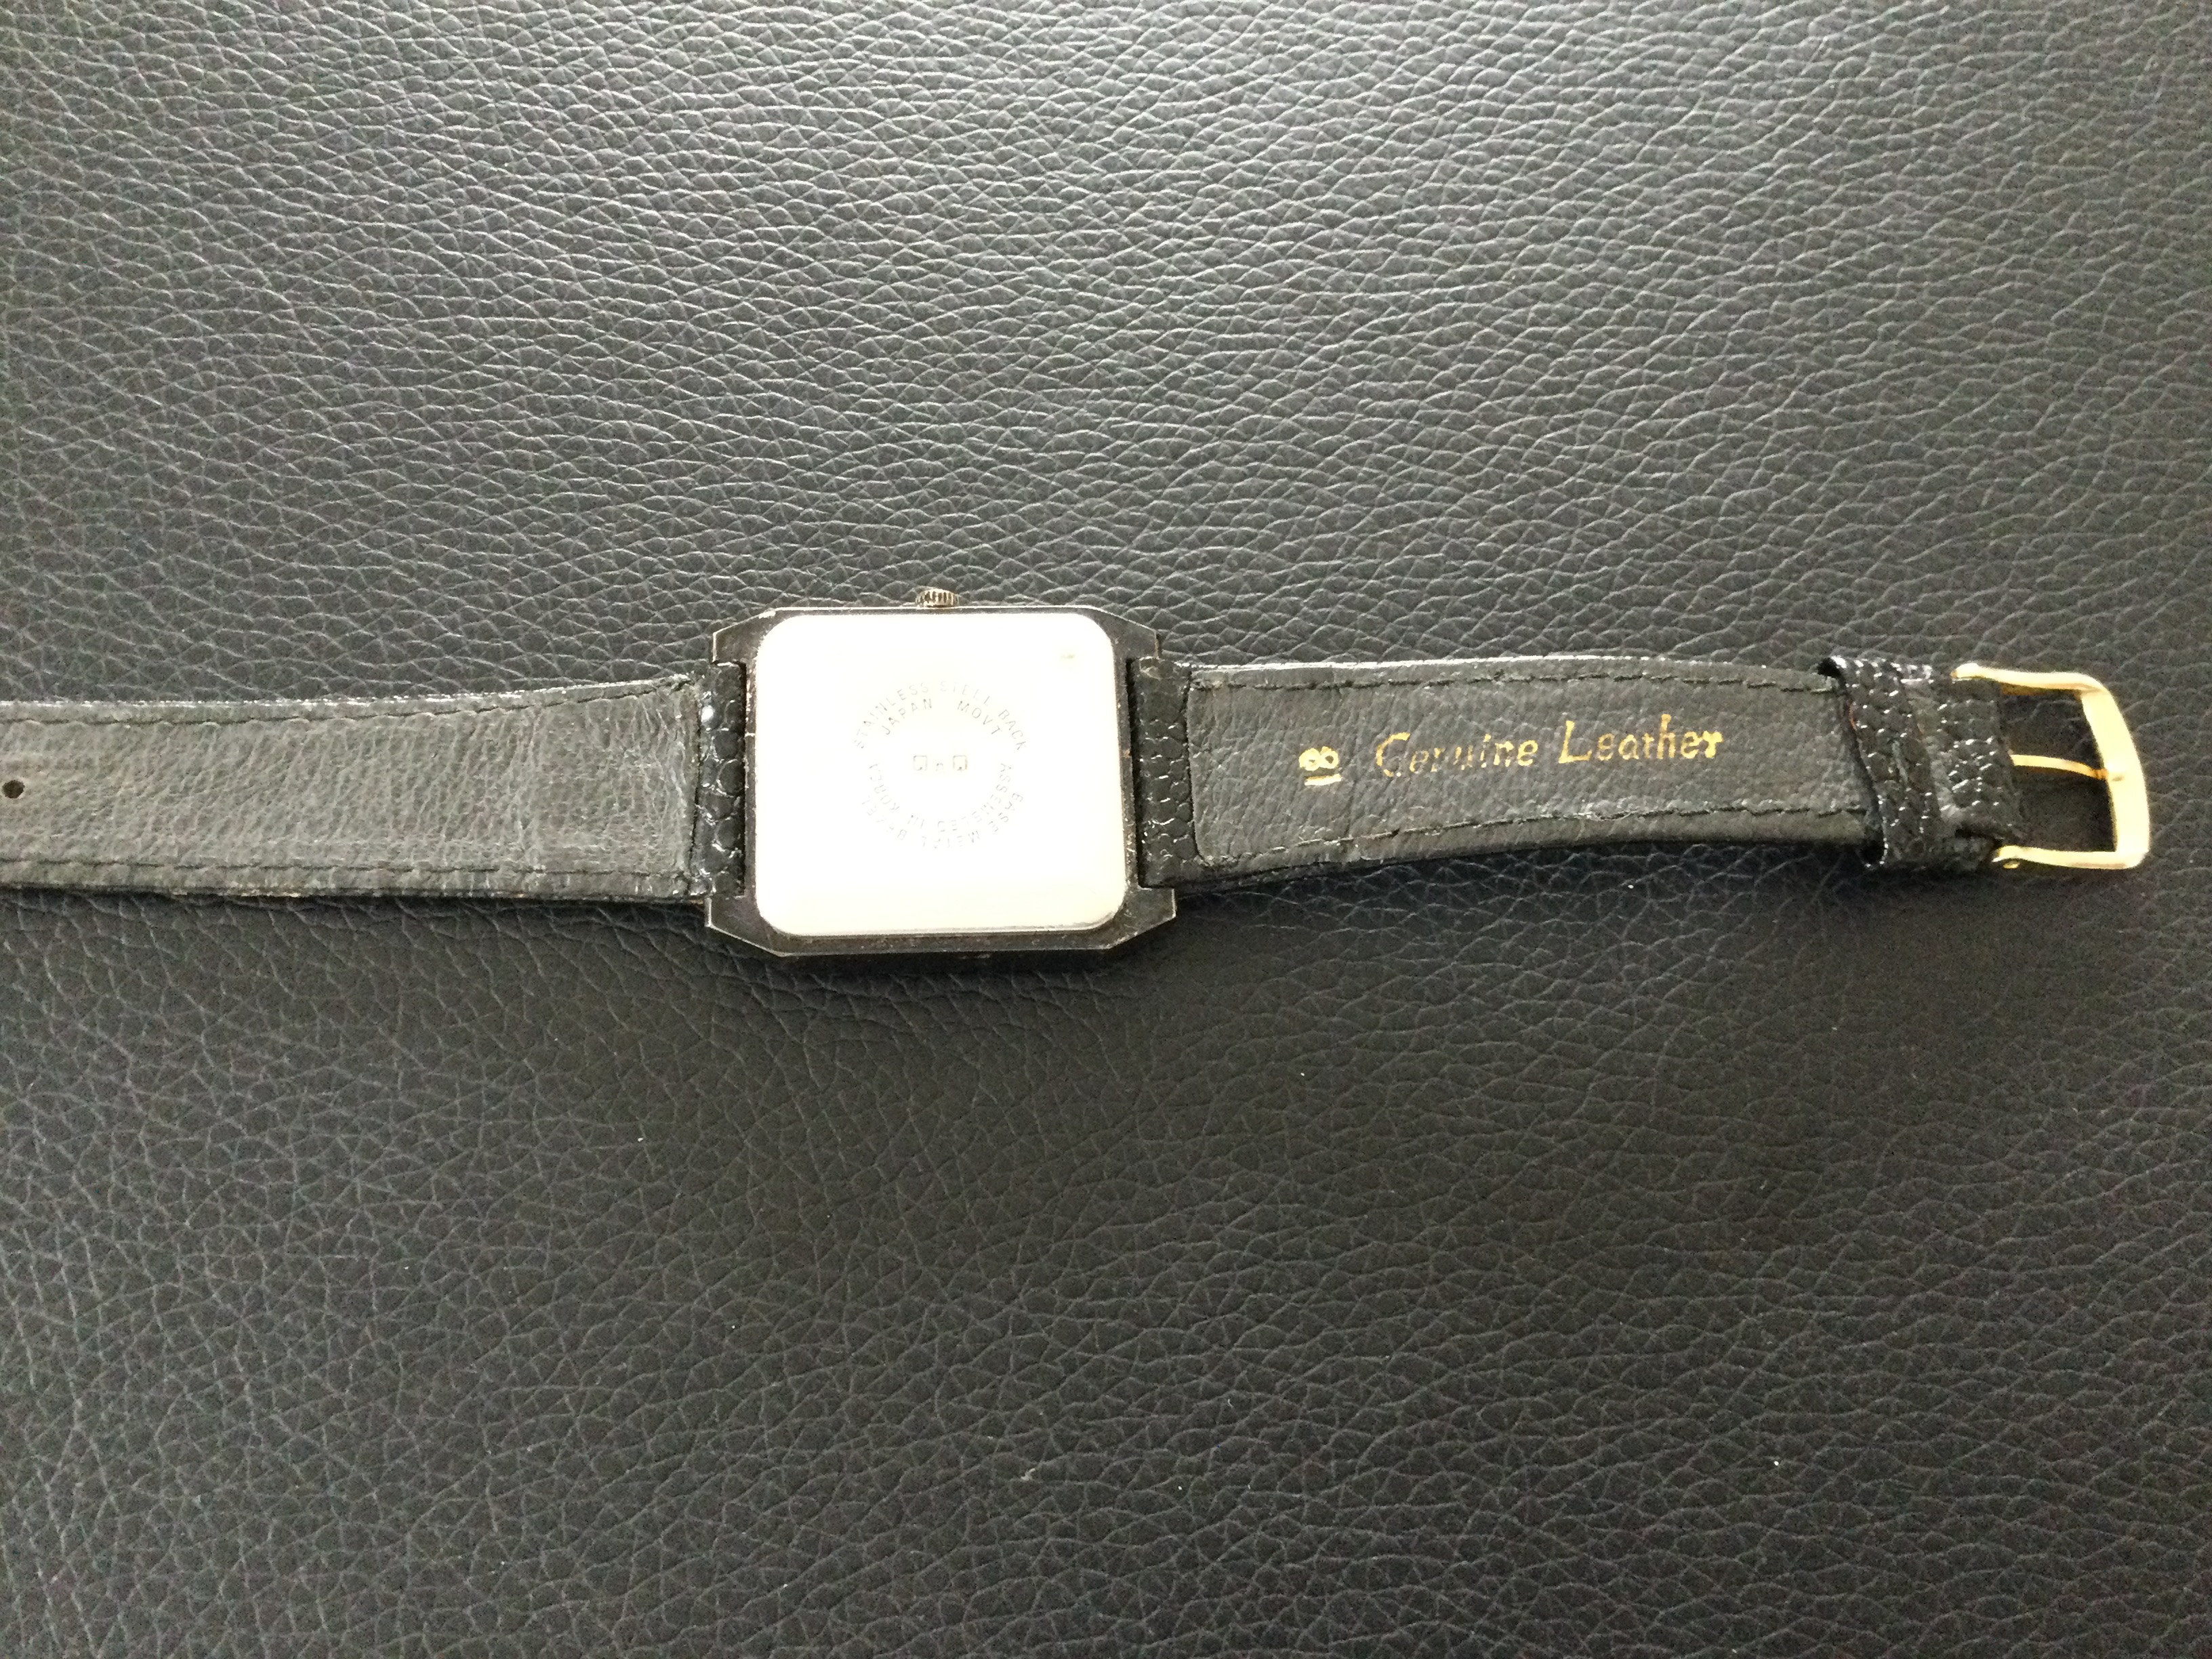 A Q & Q Unisex Wristwatch with Black Leather Strap (GS 137) - Image 5 of 5